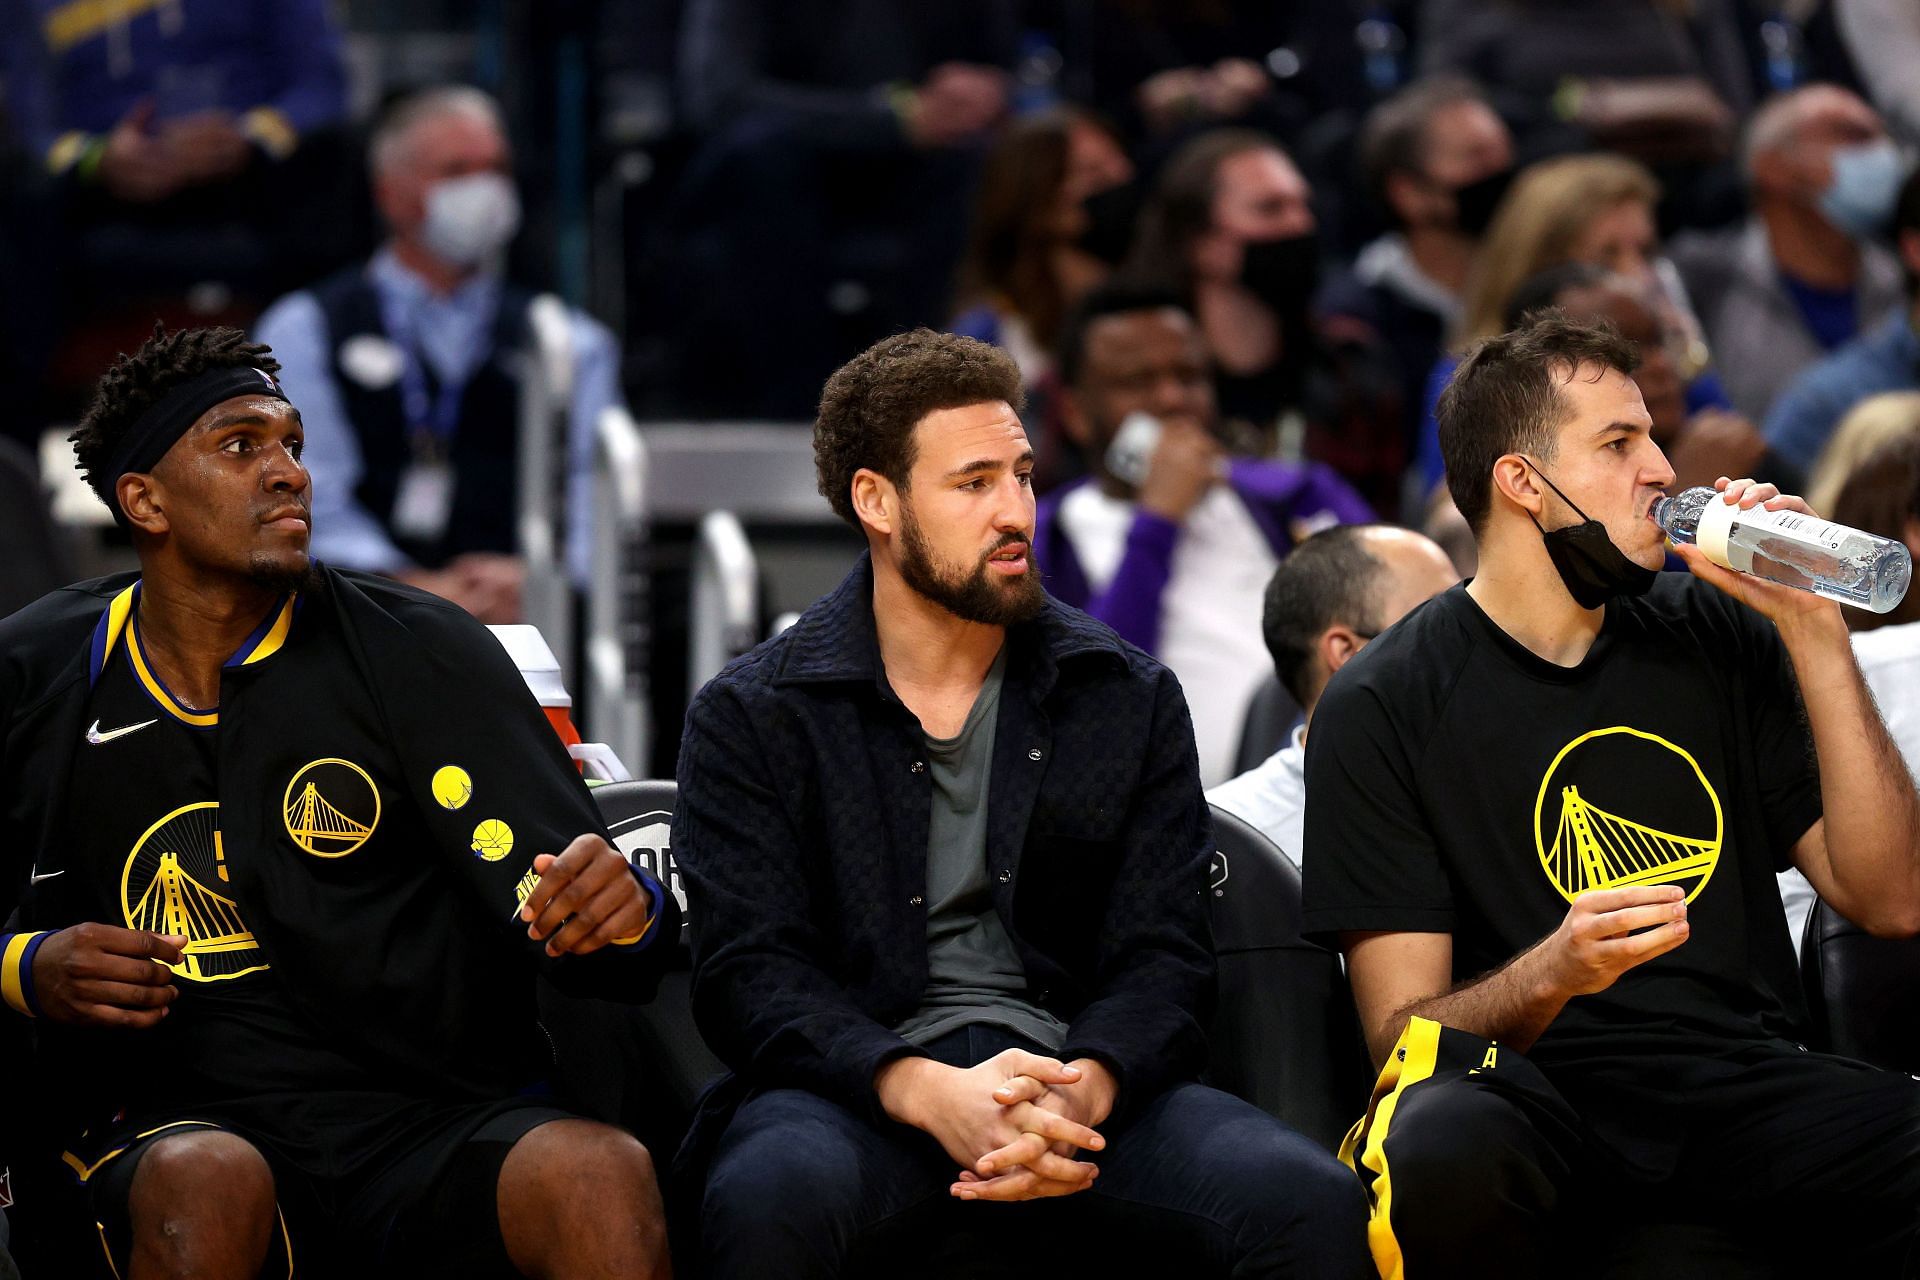 Klay Thompson of the Golden State Warriors on the bench with Kevon Looney and Nemanja Bjelica